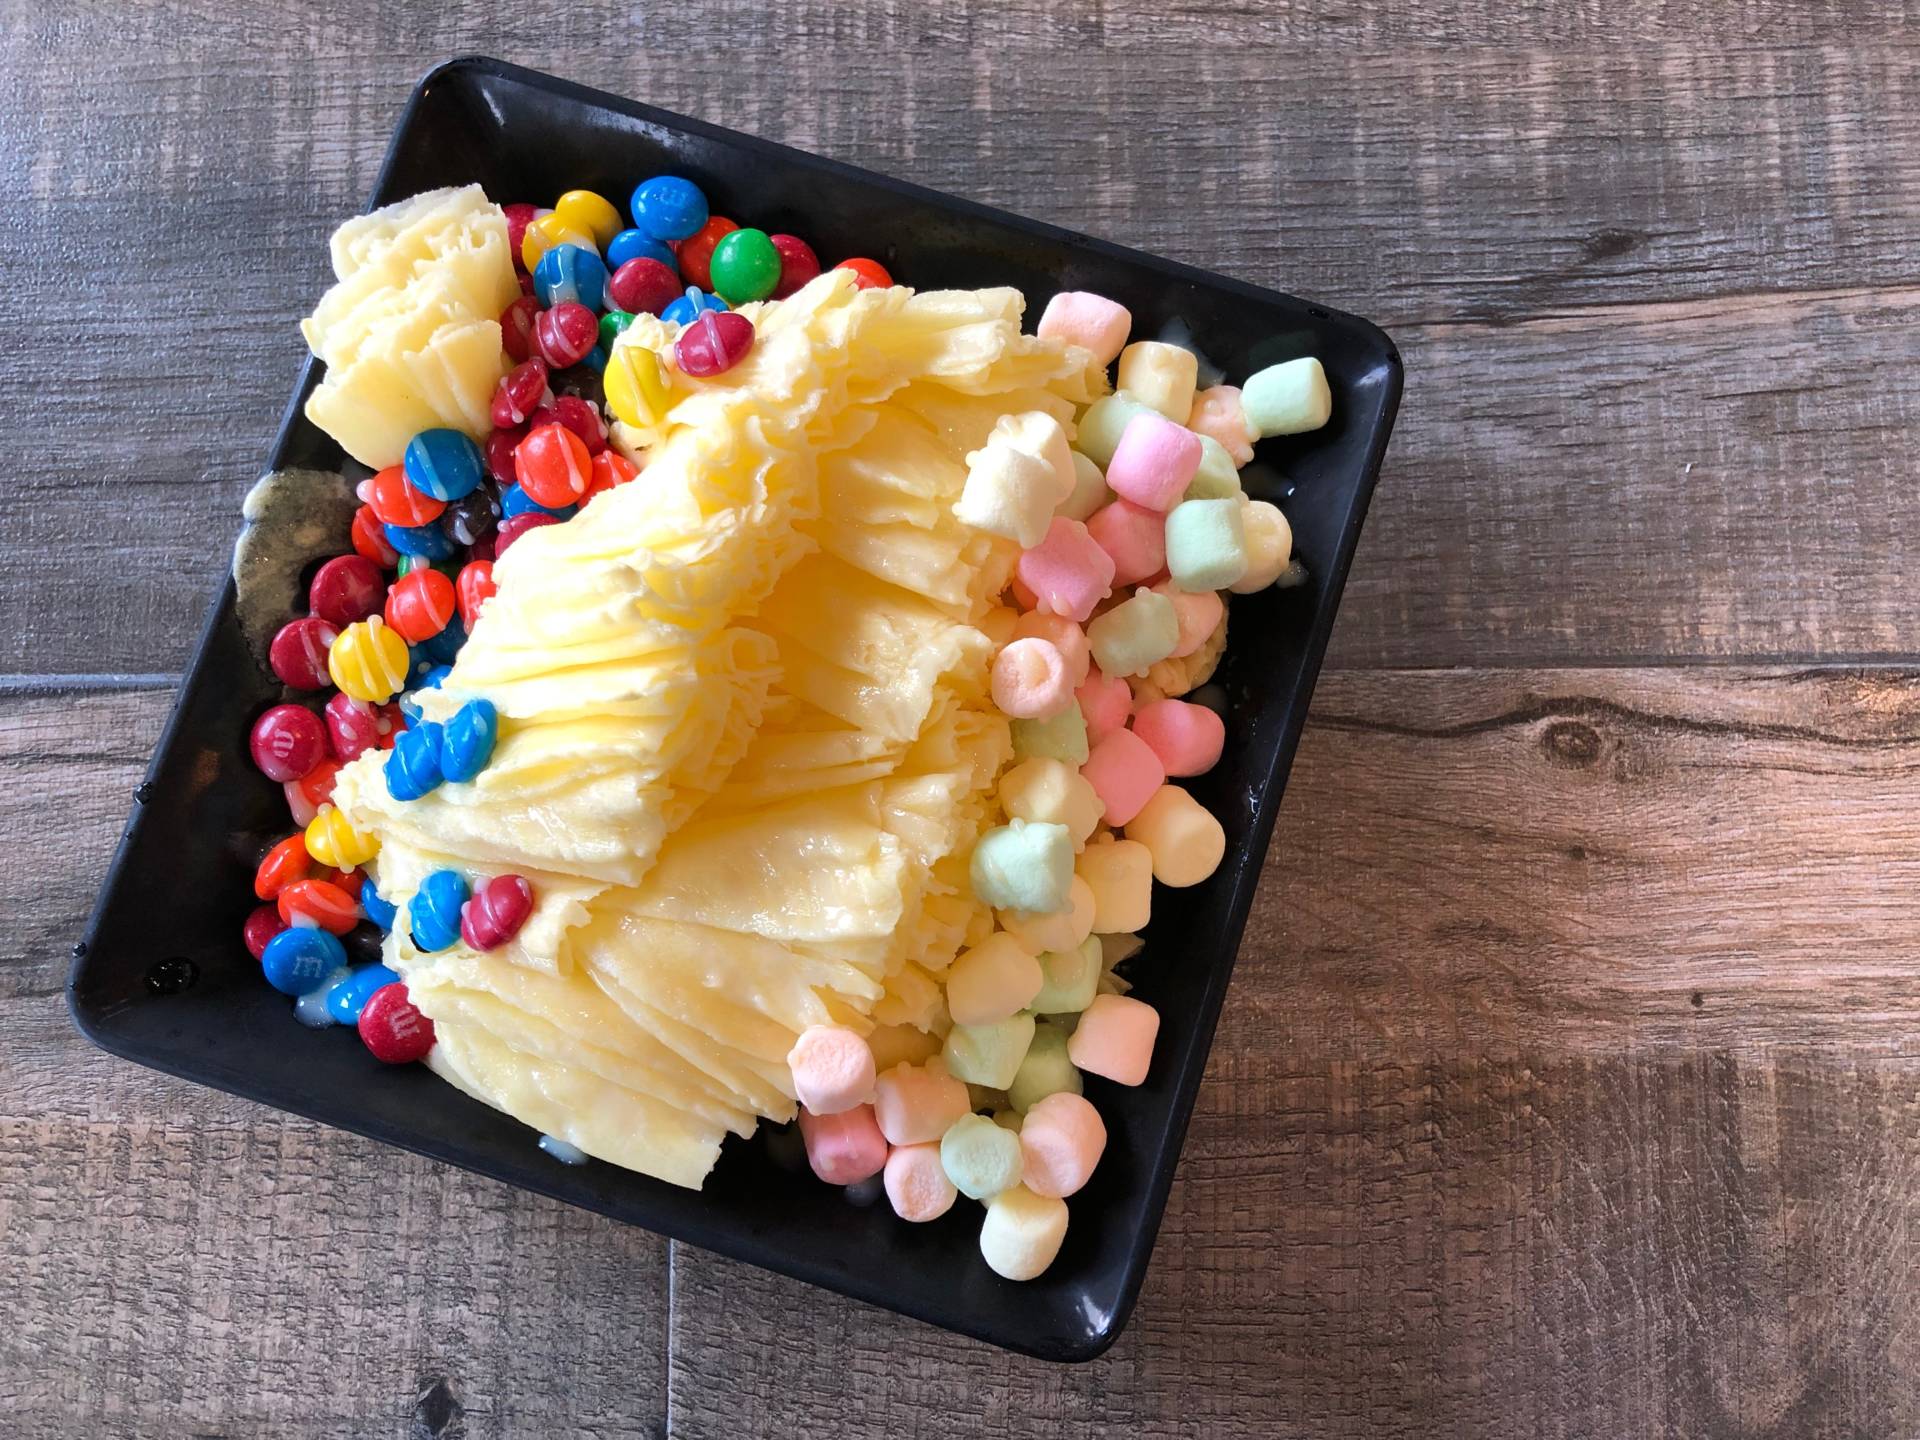 Friends with a meg-sweet tooth will love meeting up at Creme Brewlee for a shaved snow, pictured here.